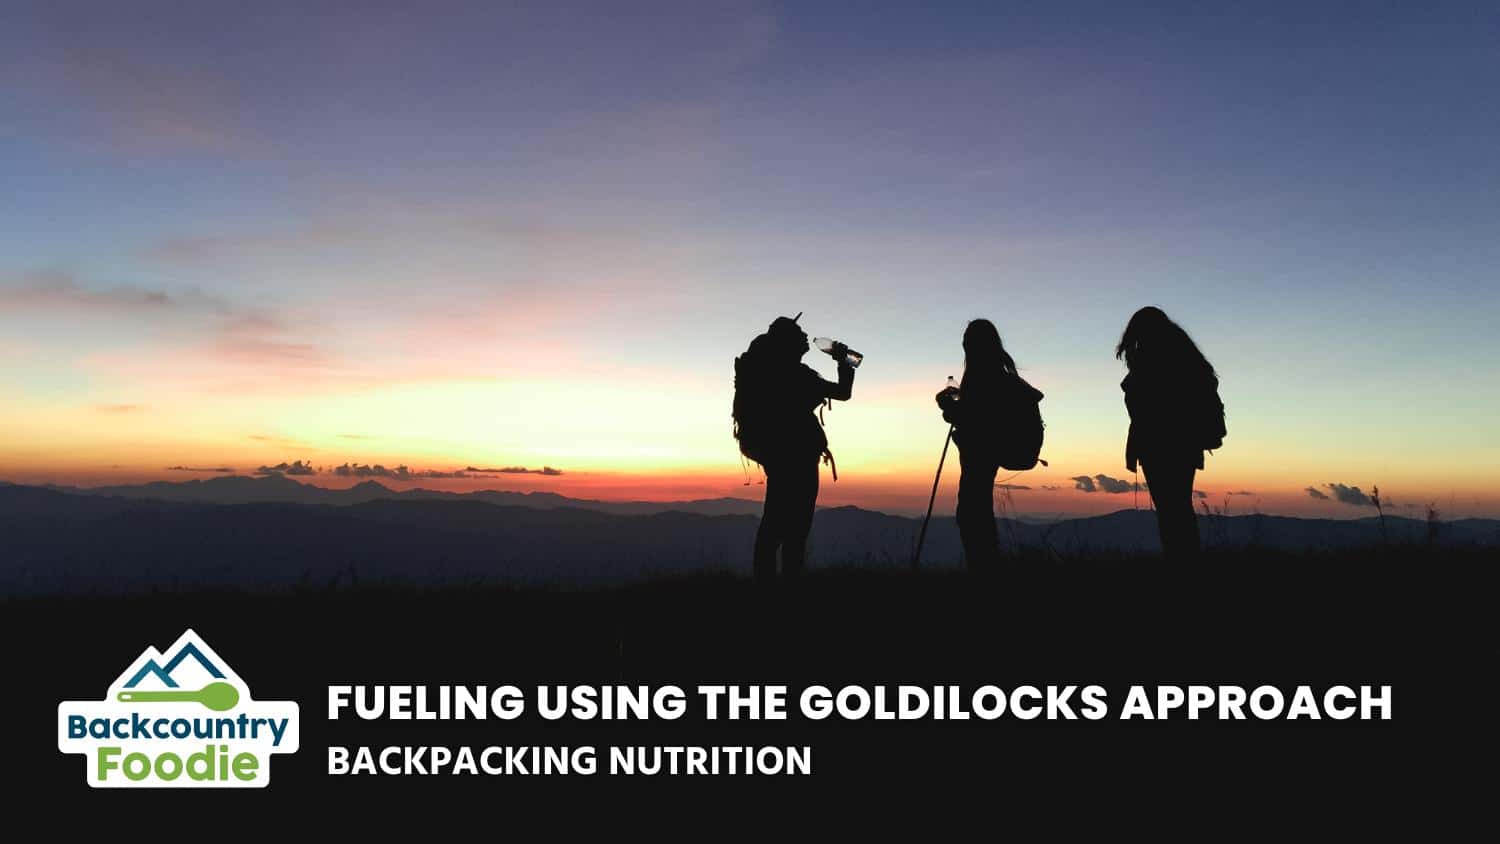 Backcountry Foodie blog post Fueling Using the Goldilocks Approach